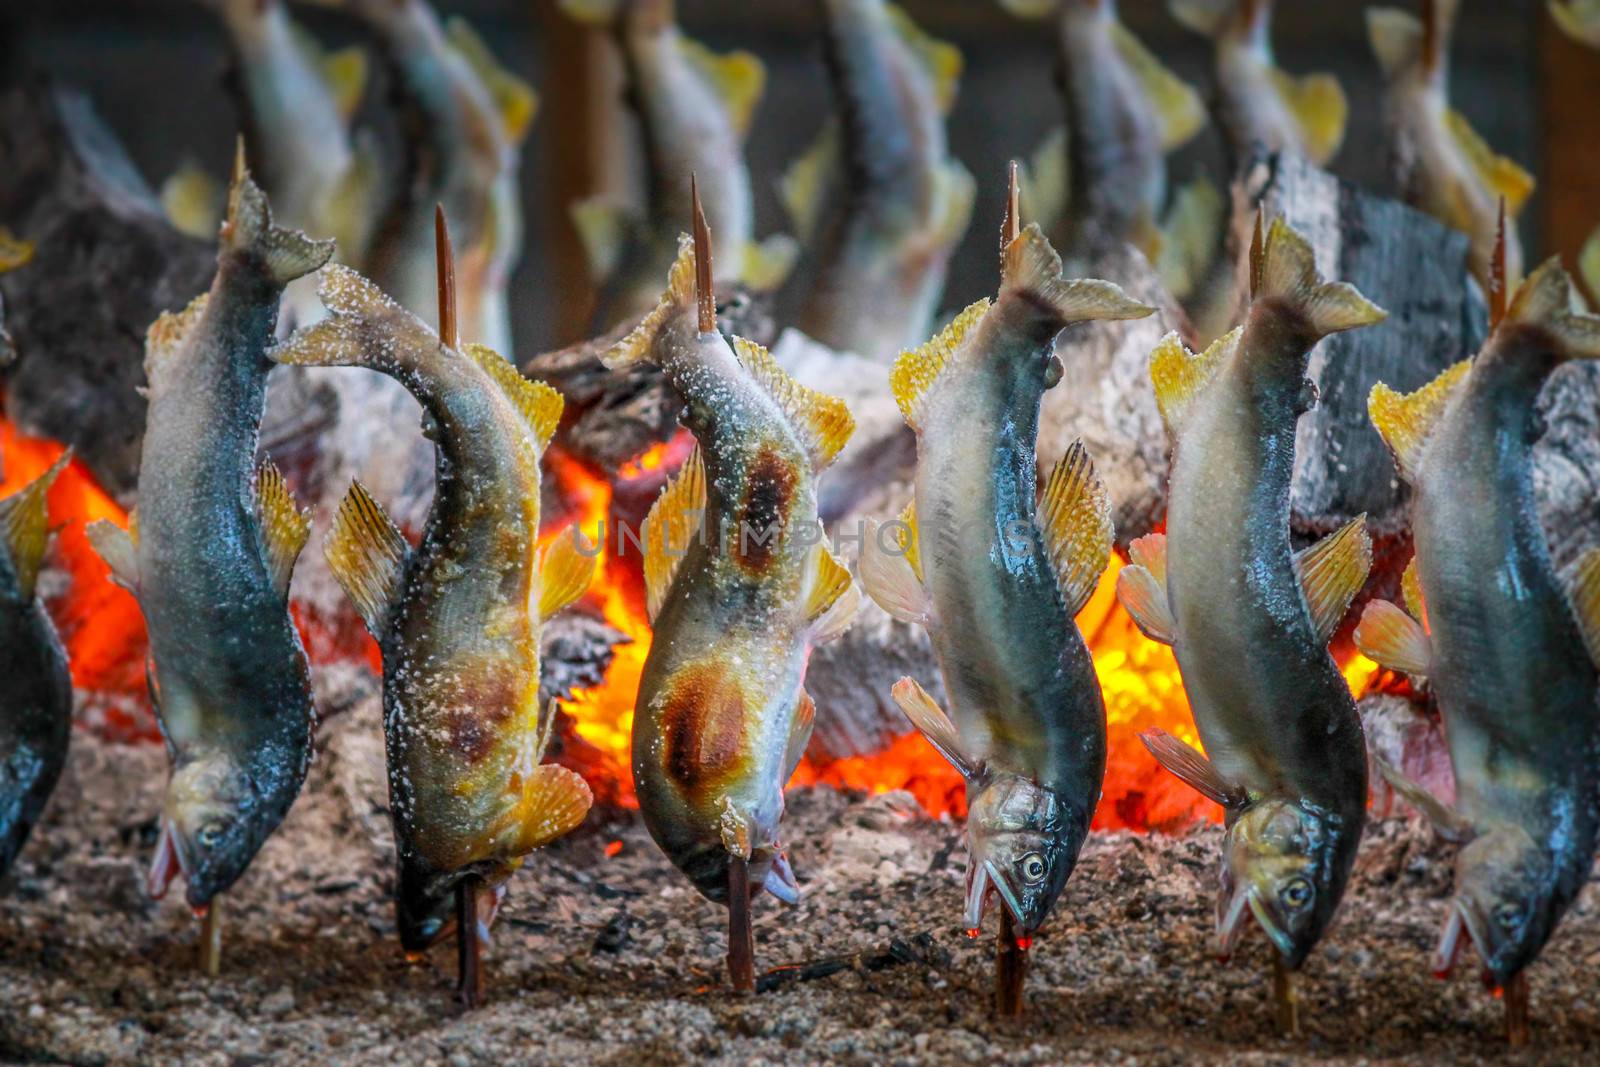 Fish Ayu with salt being charcoal broiled in Tochigi JAPAN.